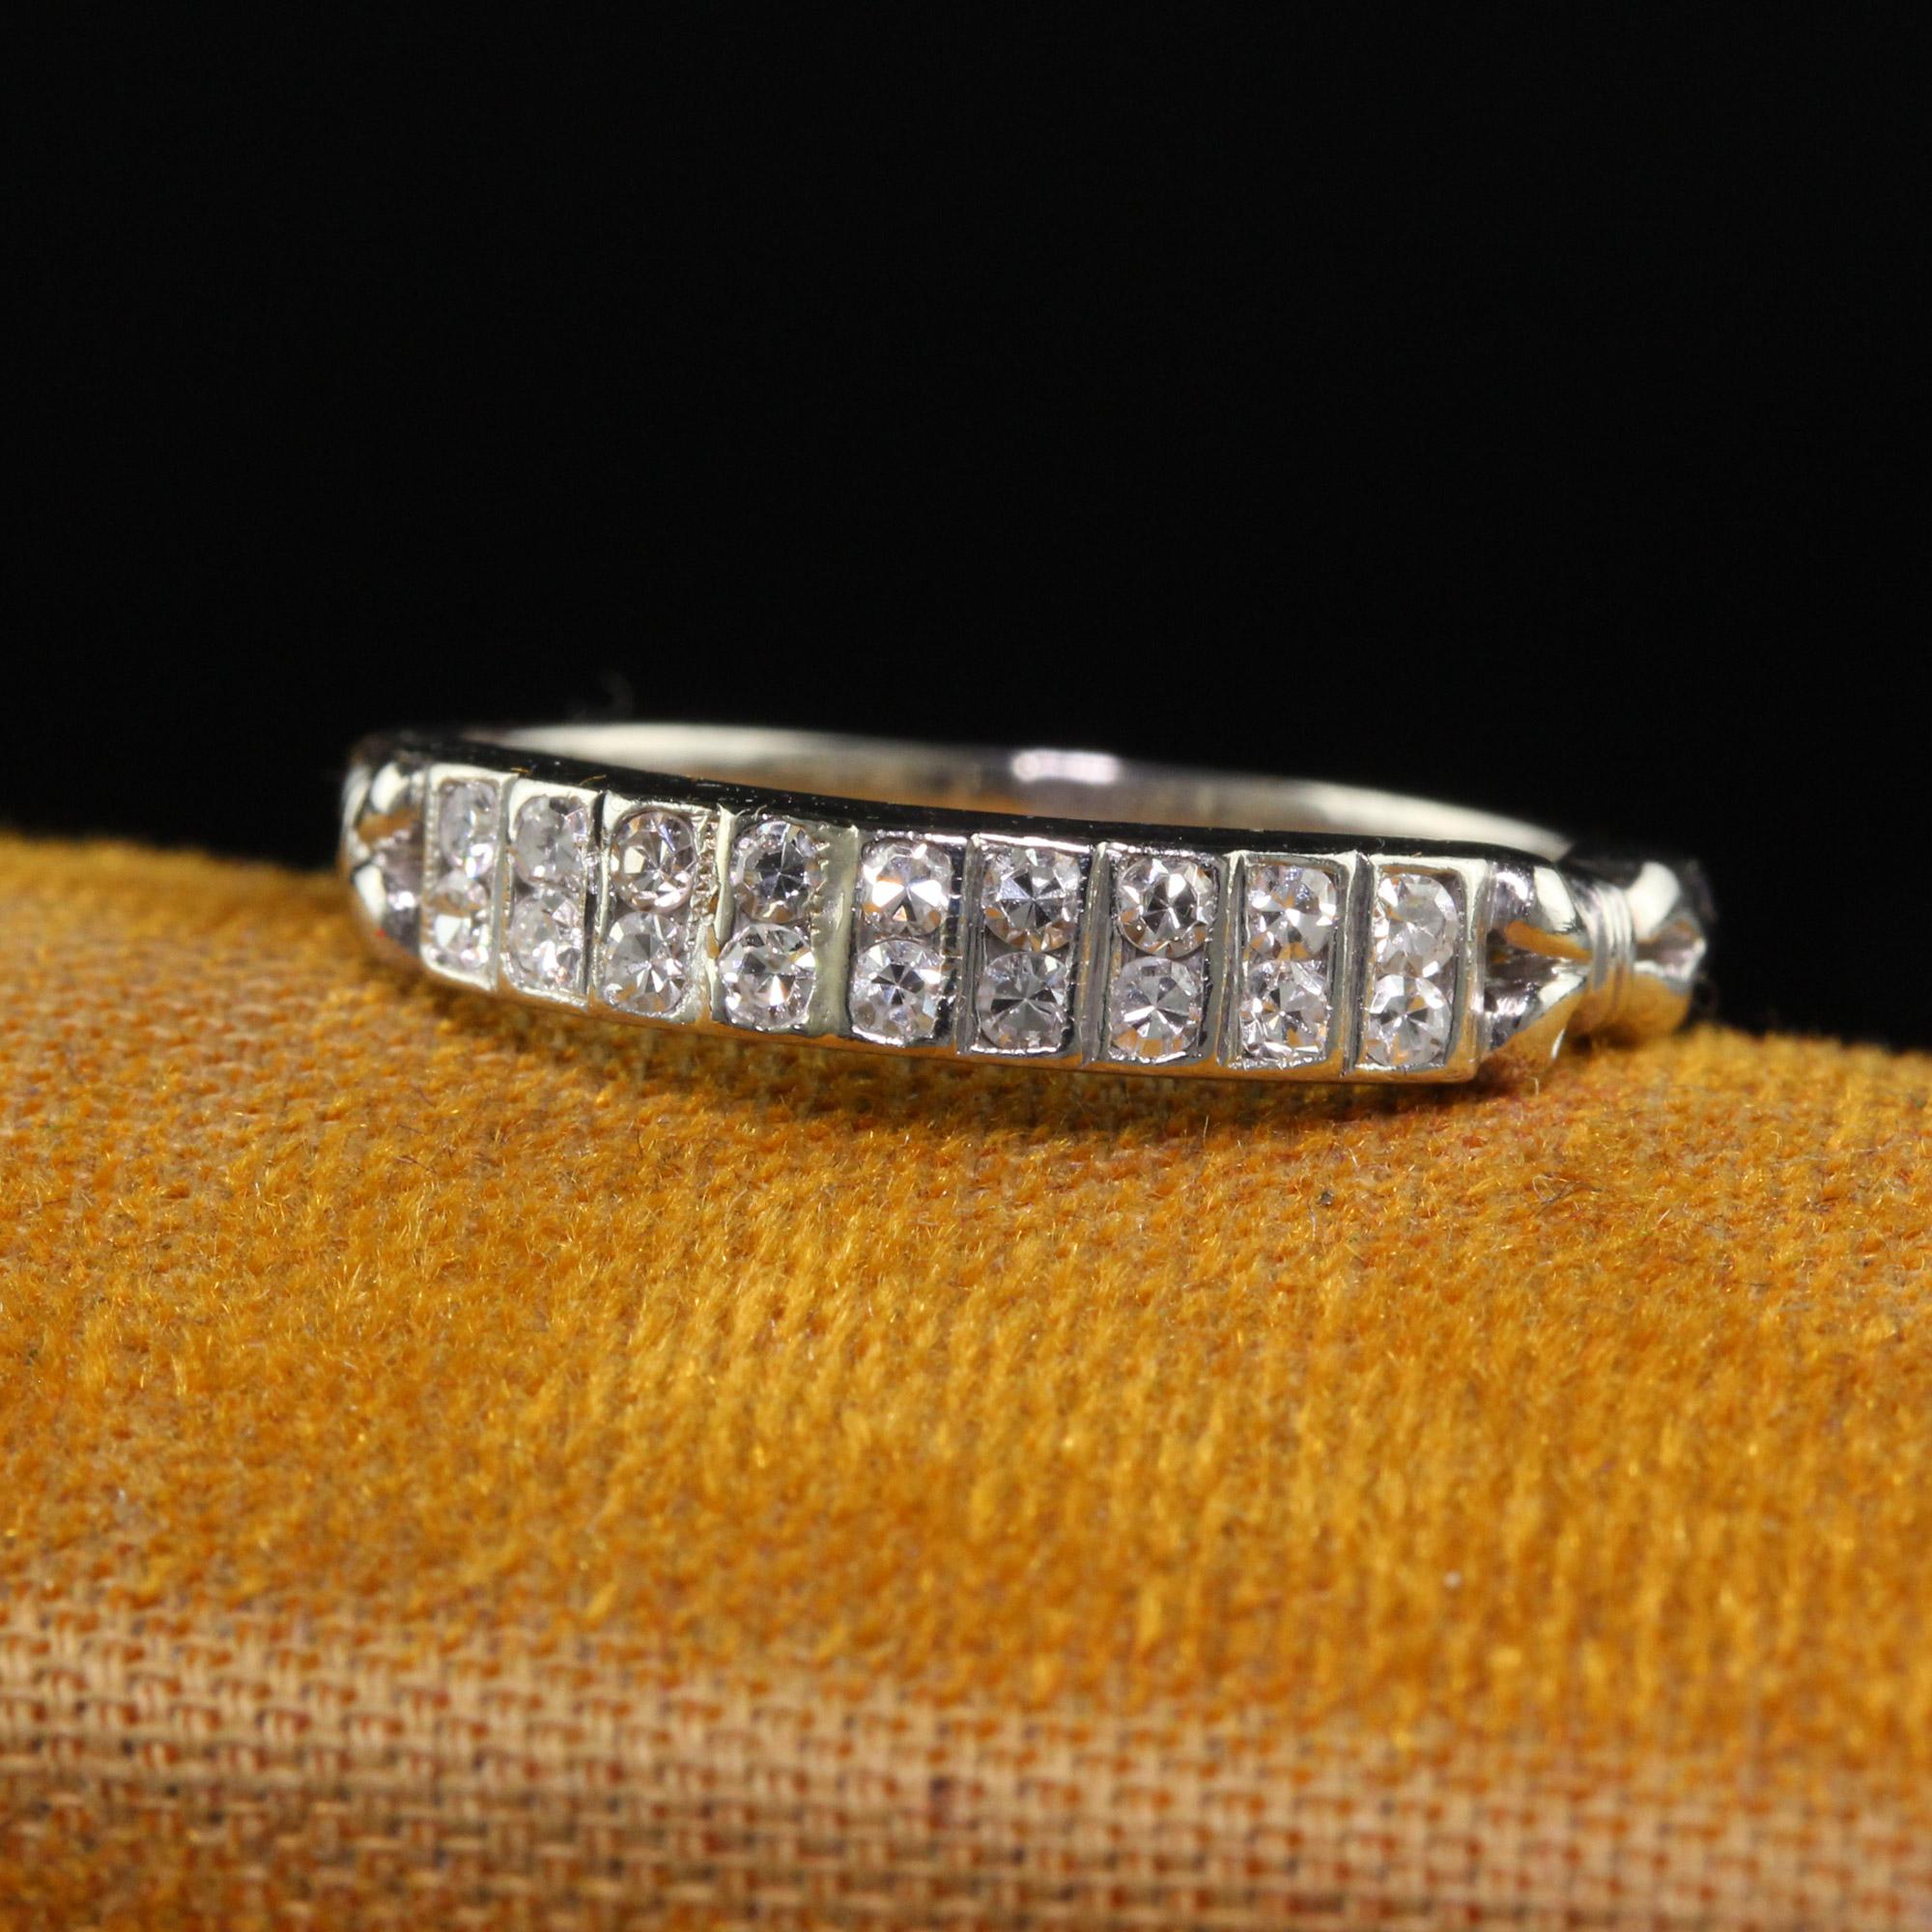 Beautiful Antique Art Deco Platinum Single Cut Diamond Double Row Wedding Band. This beautiful wedding band is crafted in platinum. The top of the ring has two rows of single cut diamonds and has a beautiful design on both sides. The ring is in good